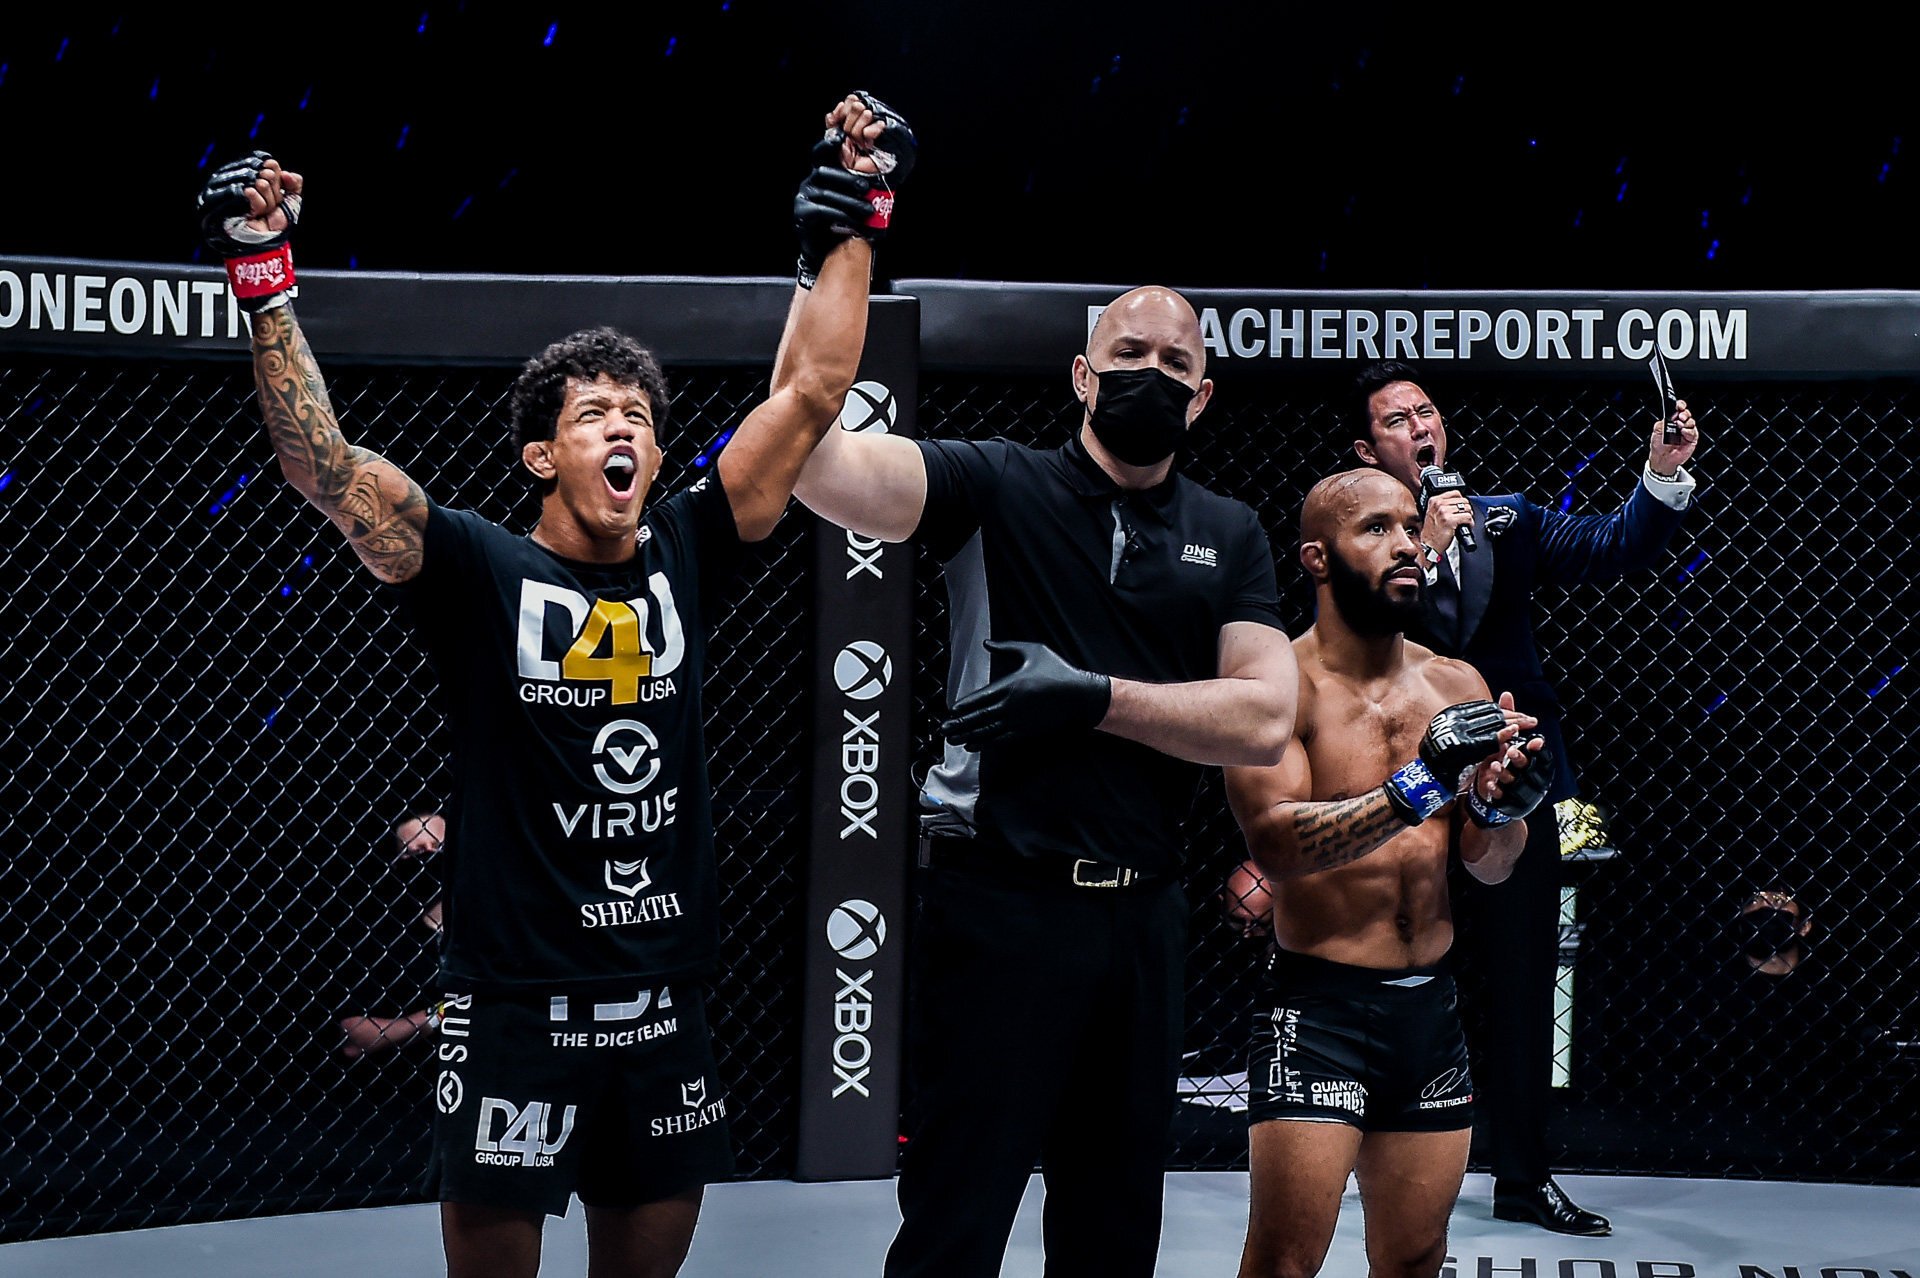 ONE Championship: Adriano Moraes TKOs Demetrious Johnson in stunning upset to retain flyweight title. South China Morning Post